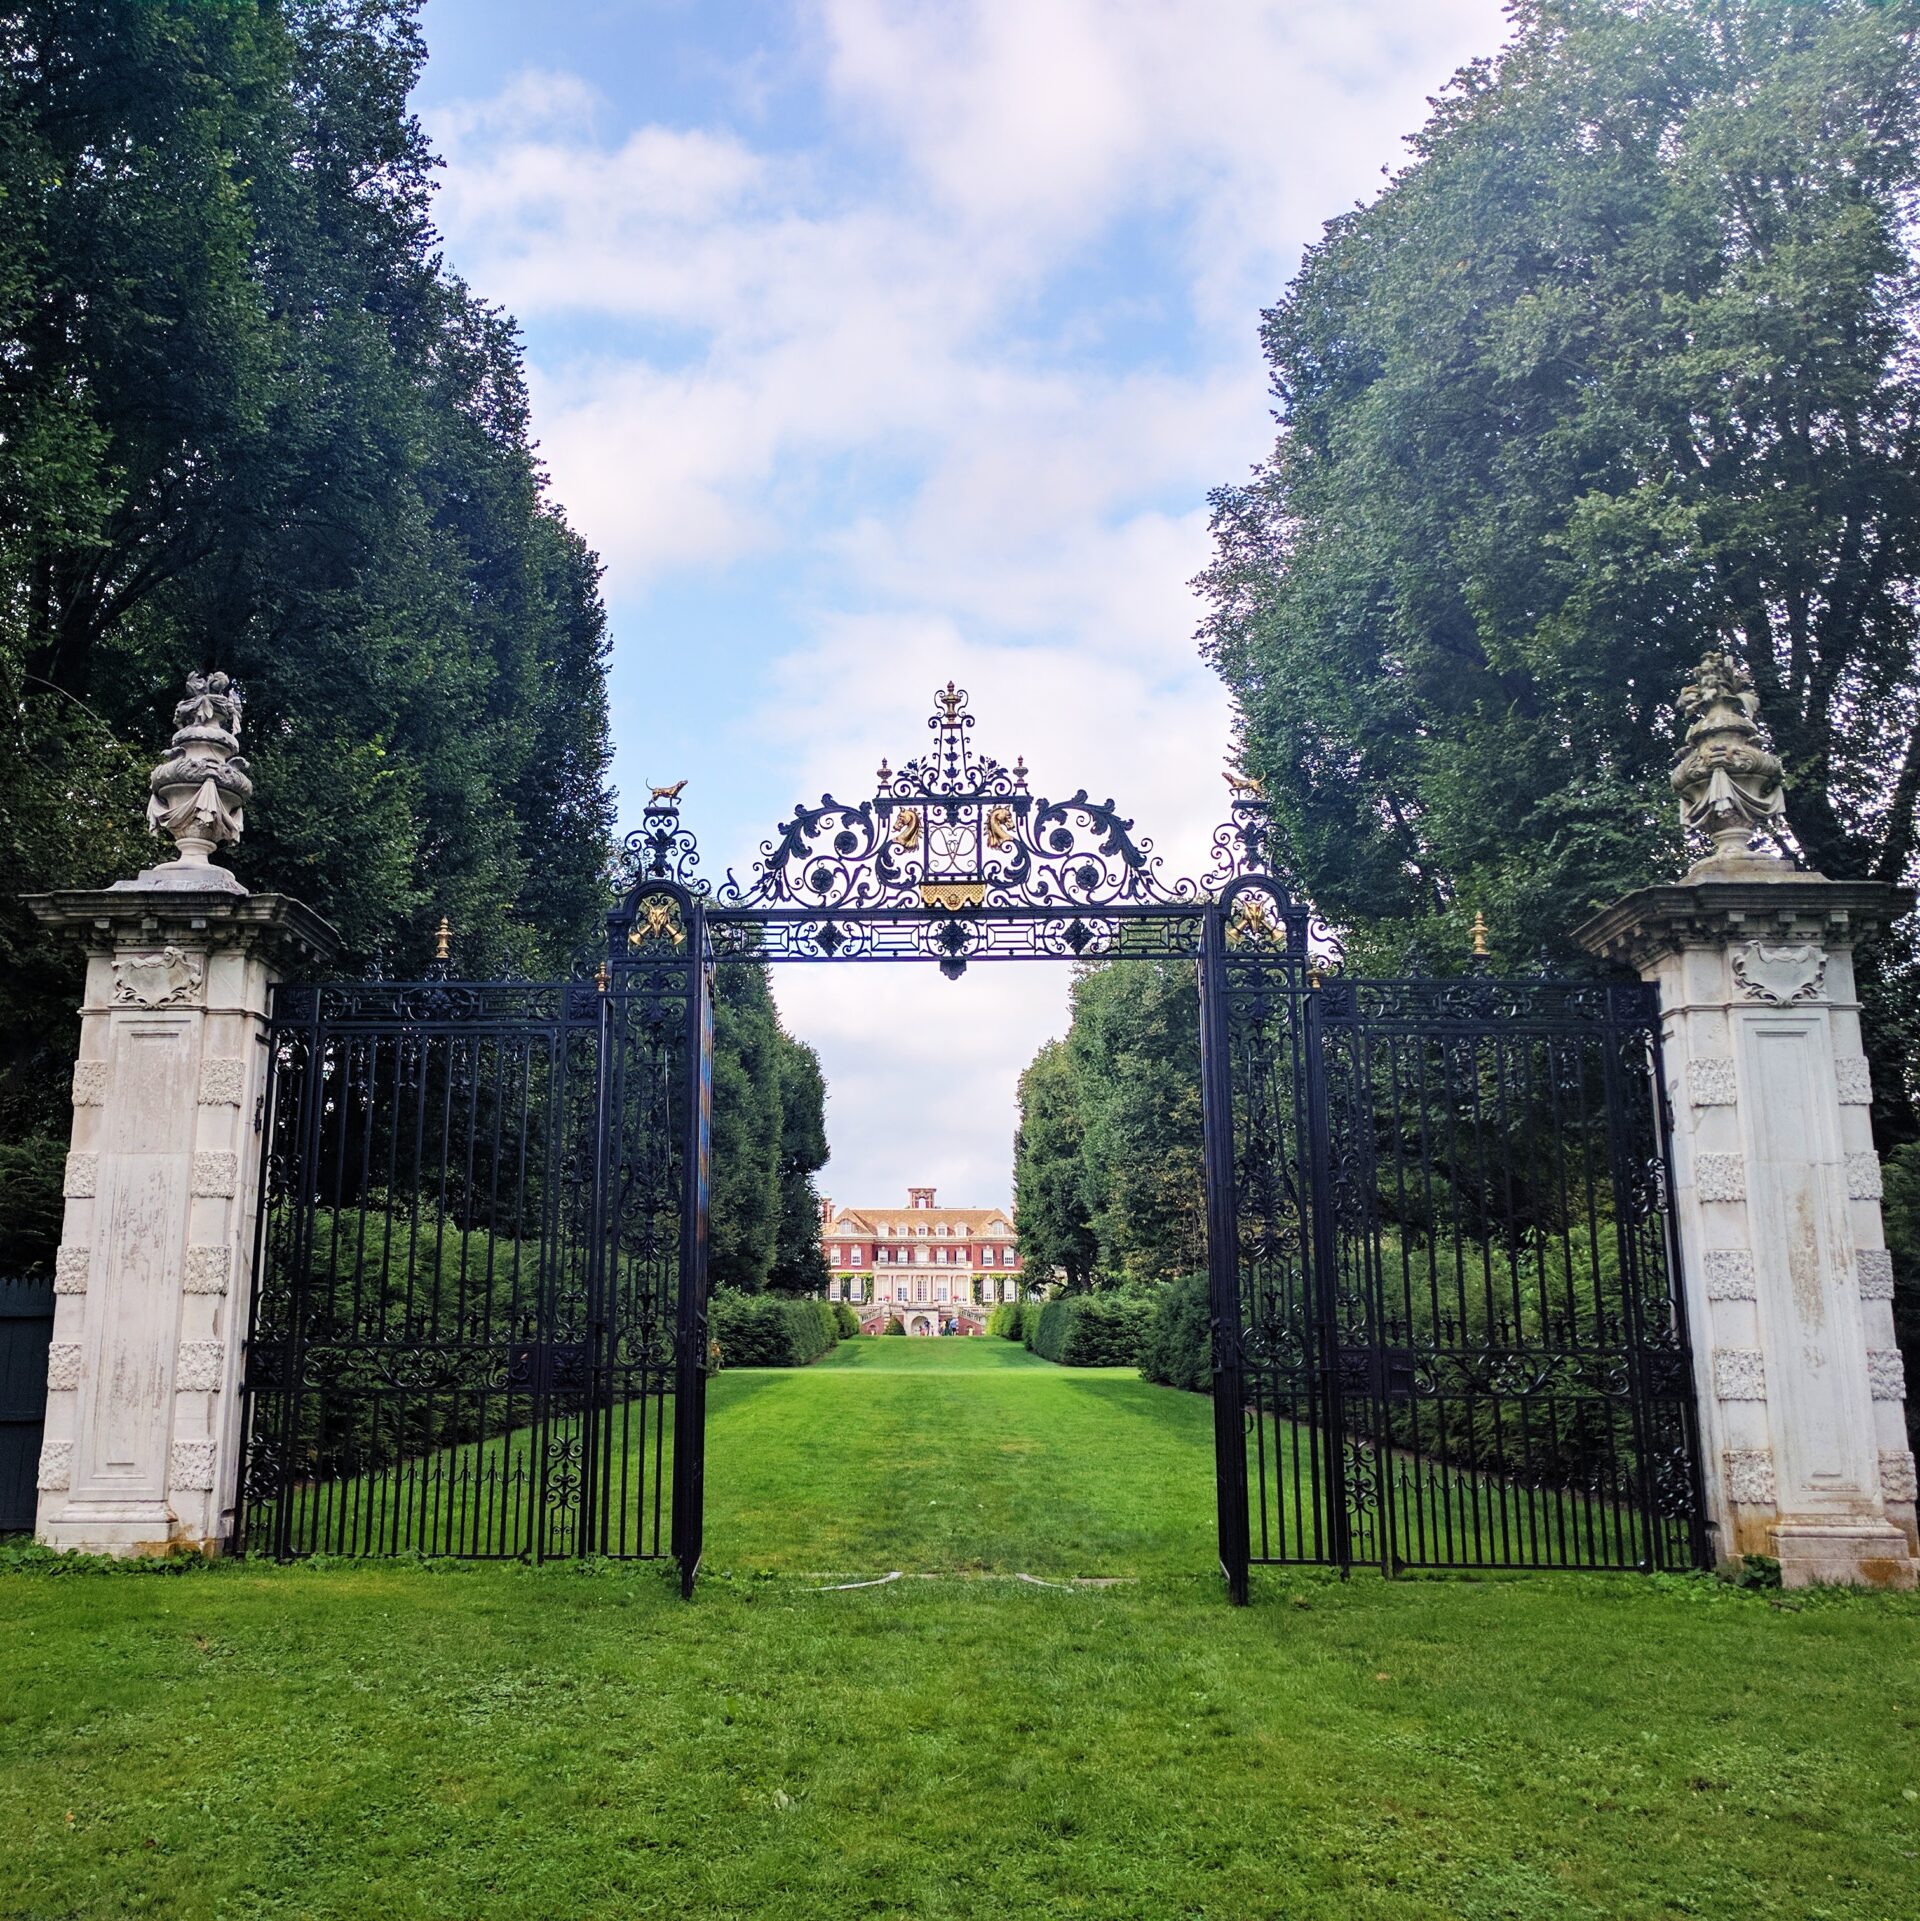 an intricate gate standing in the grass with a grand house visible on the other end